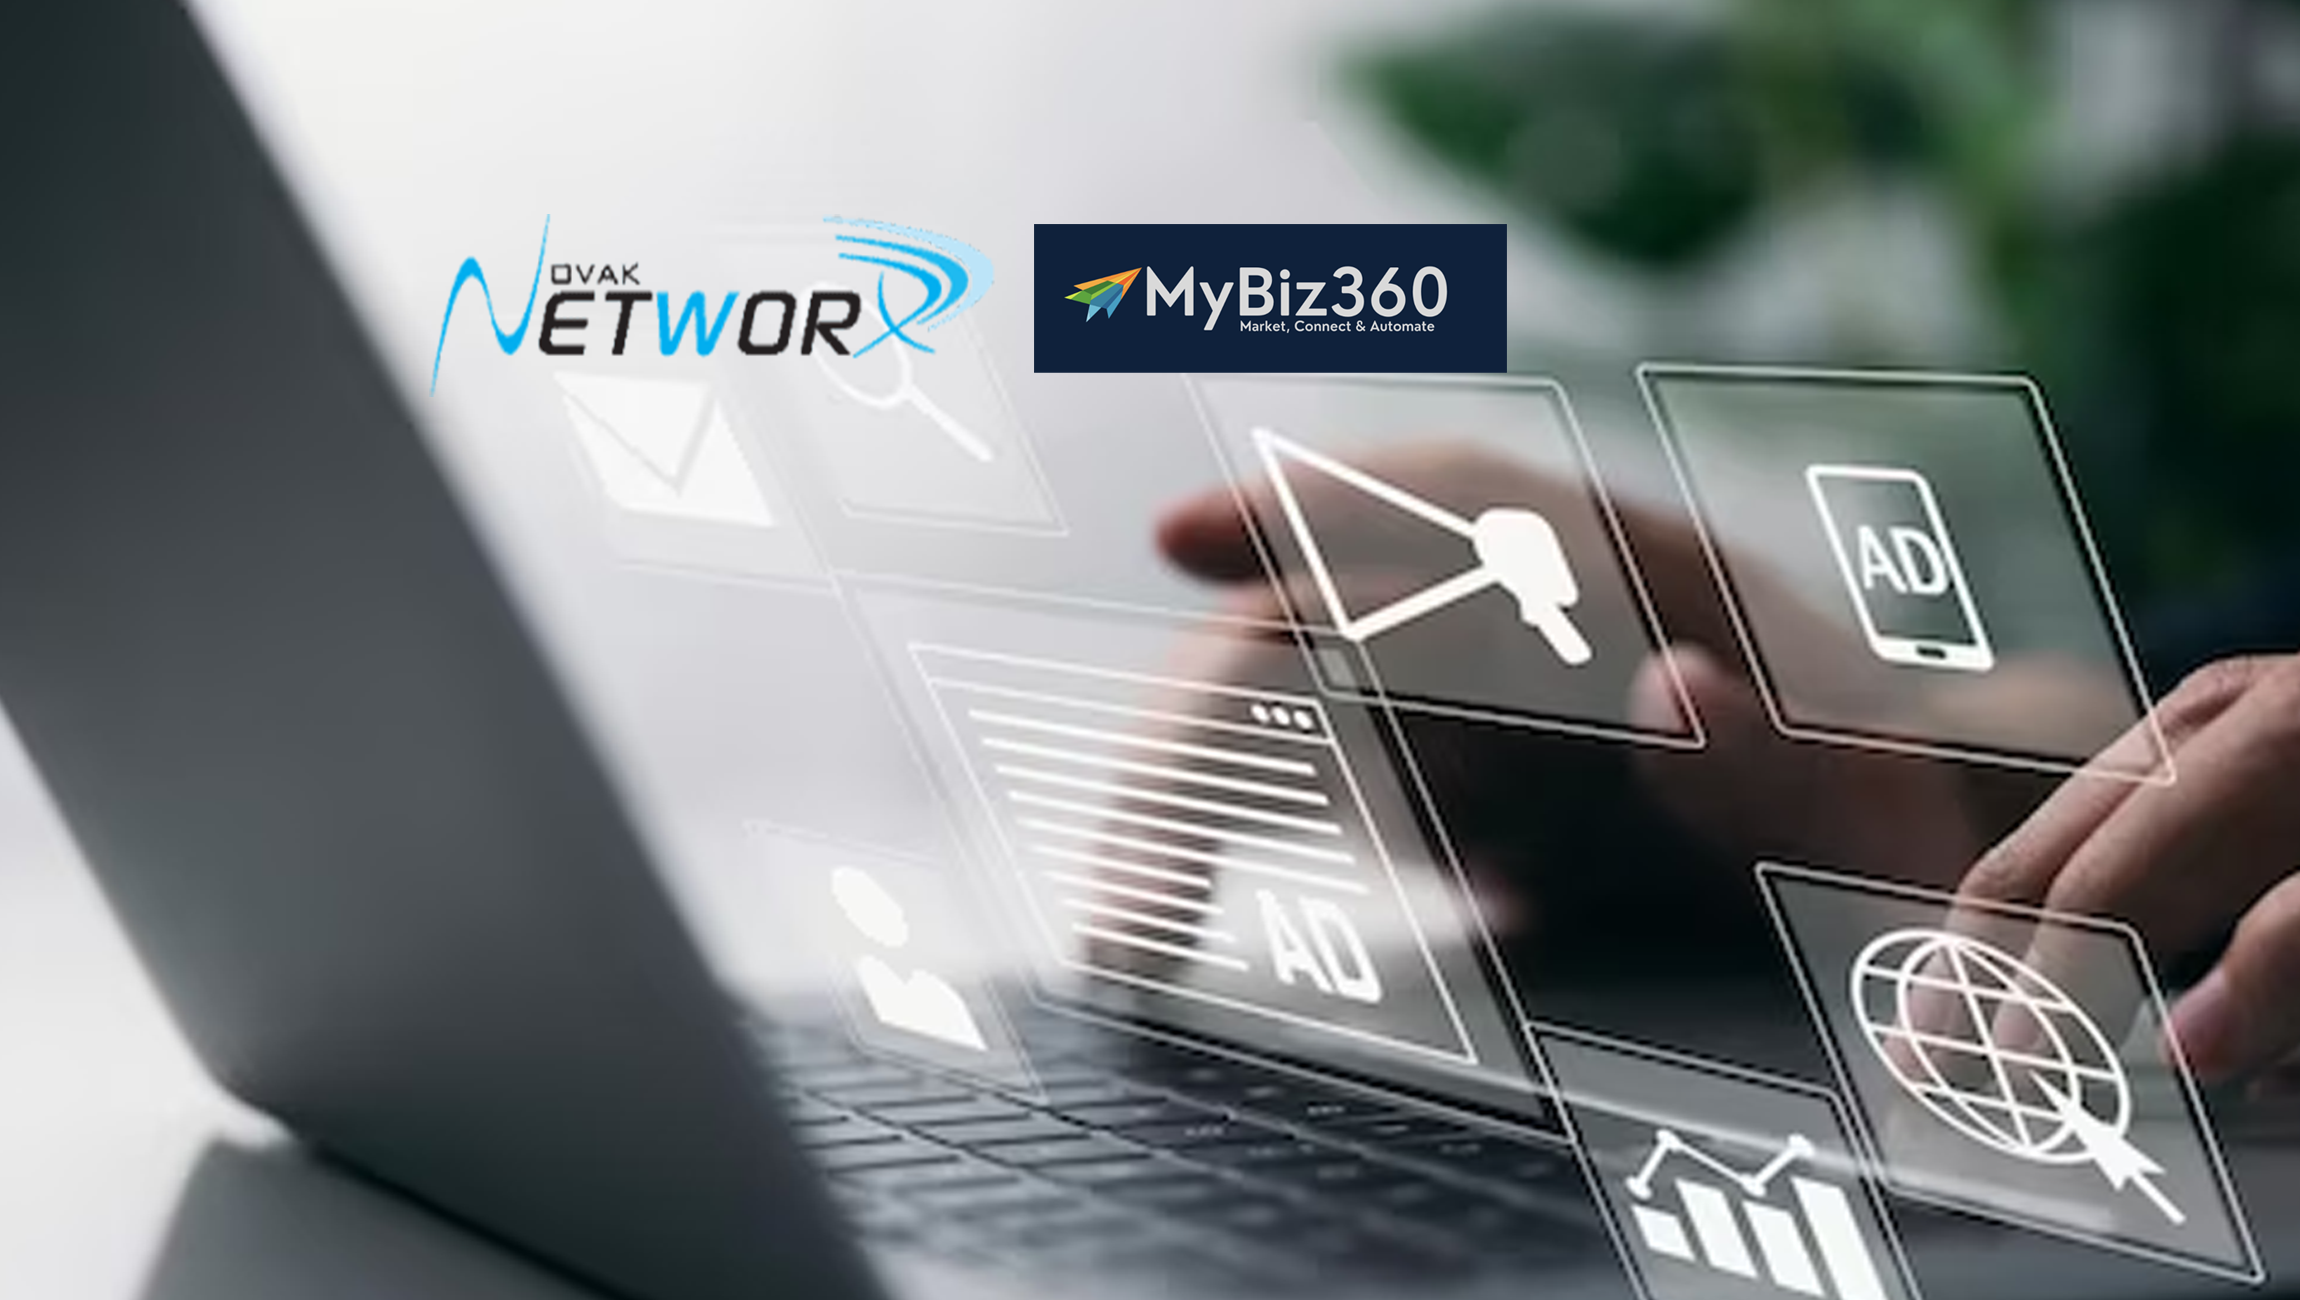 Introducing MyBiz360.io: The Game-Changing All-In-One Sales & Marketing Platform for Business Owners